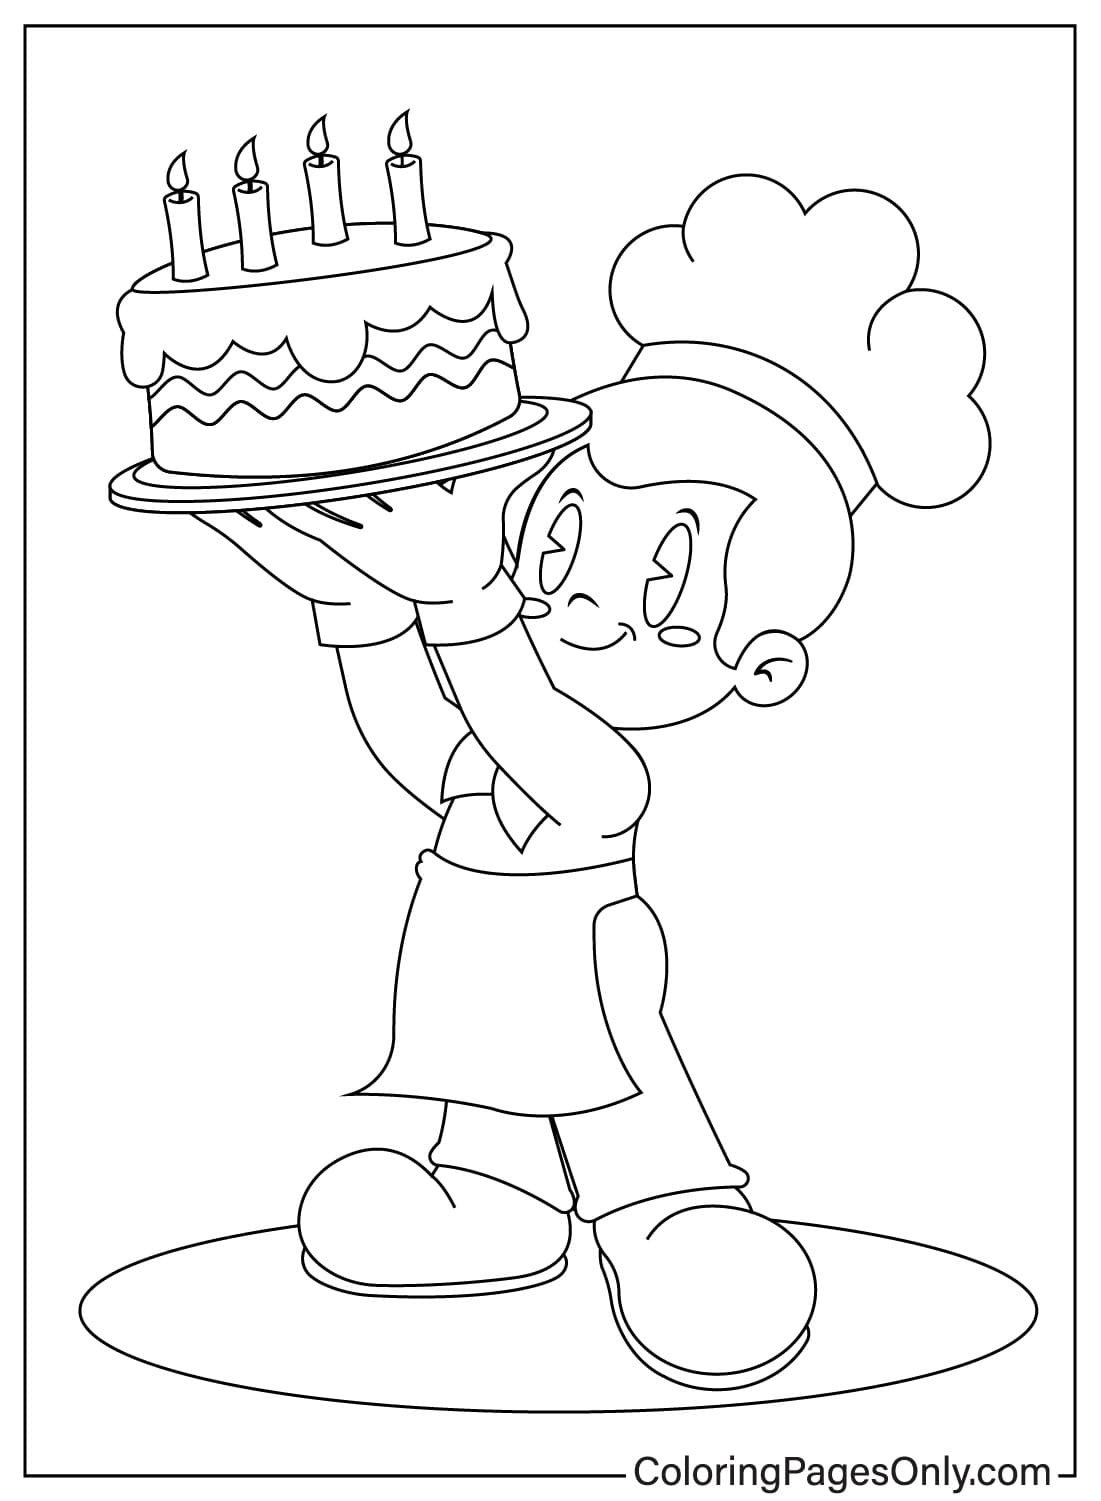 Birthday Cake Coloring Sheet for Kids from Birthday Cake